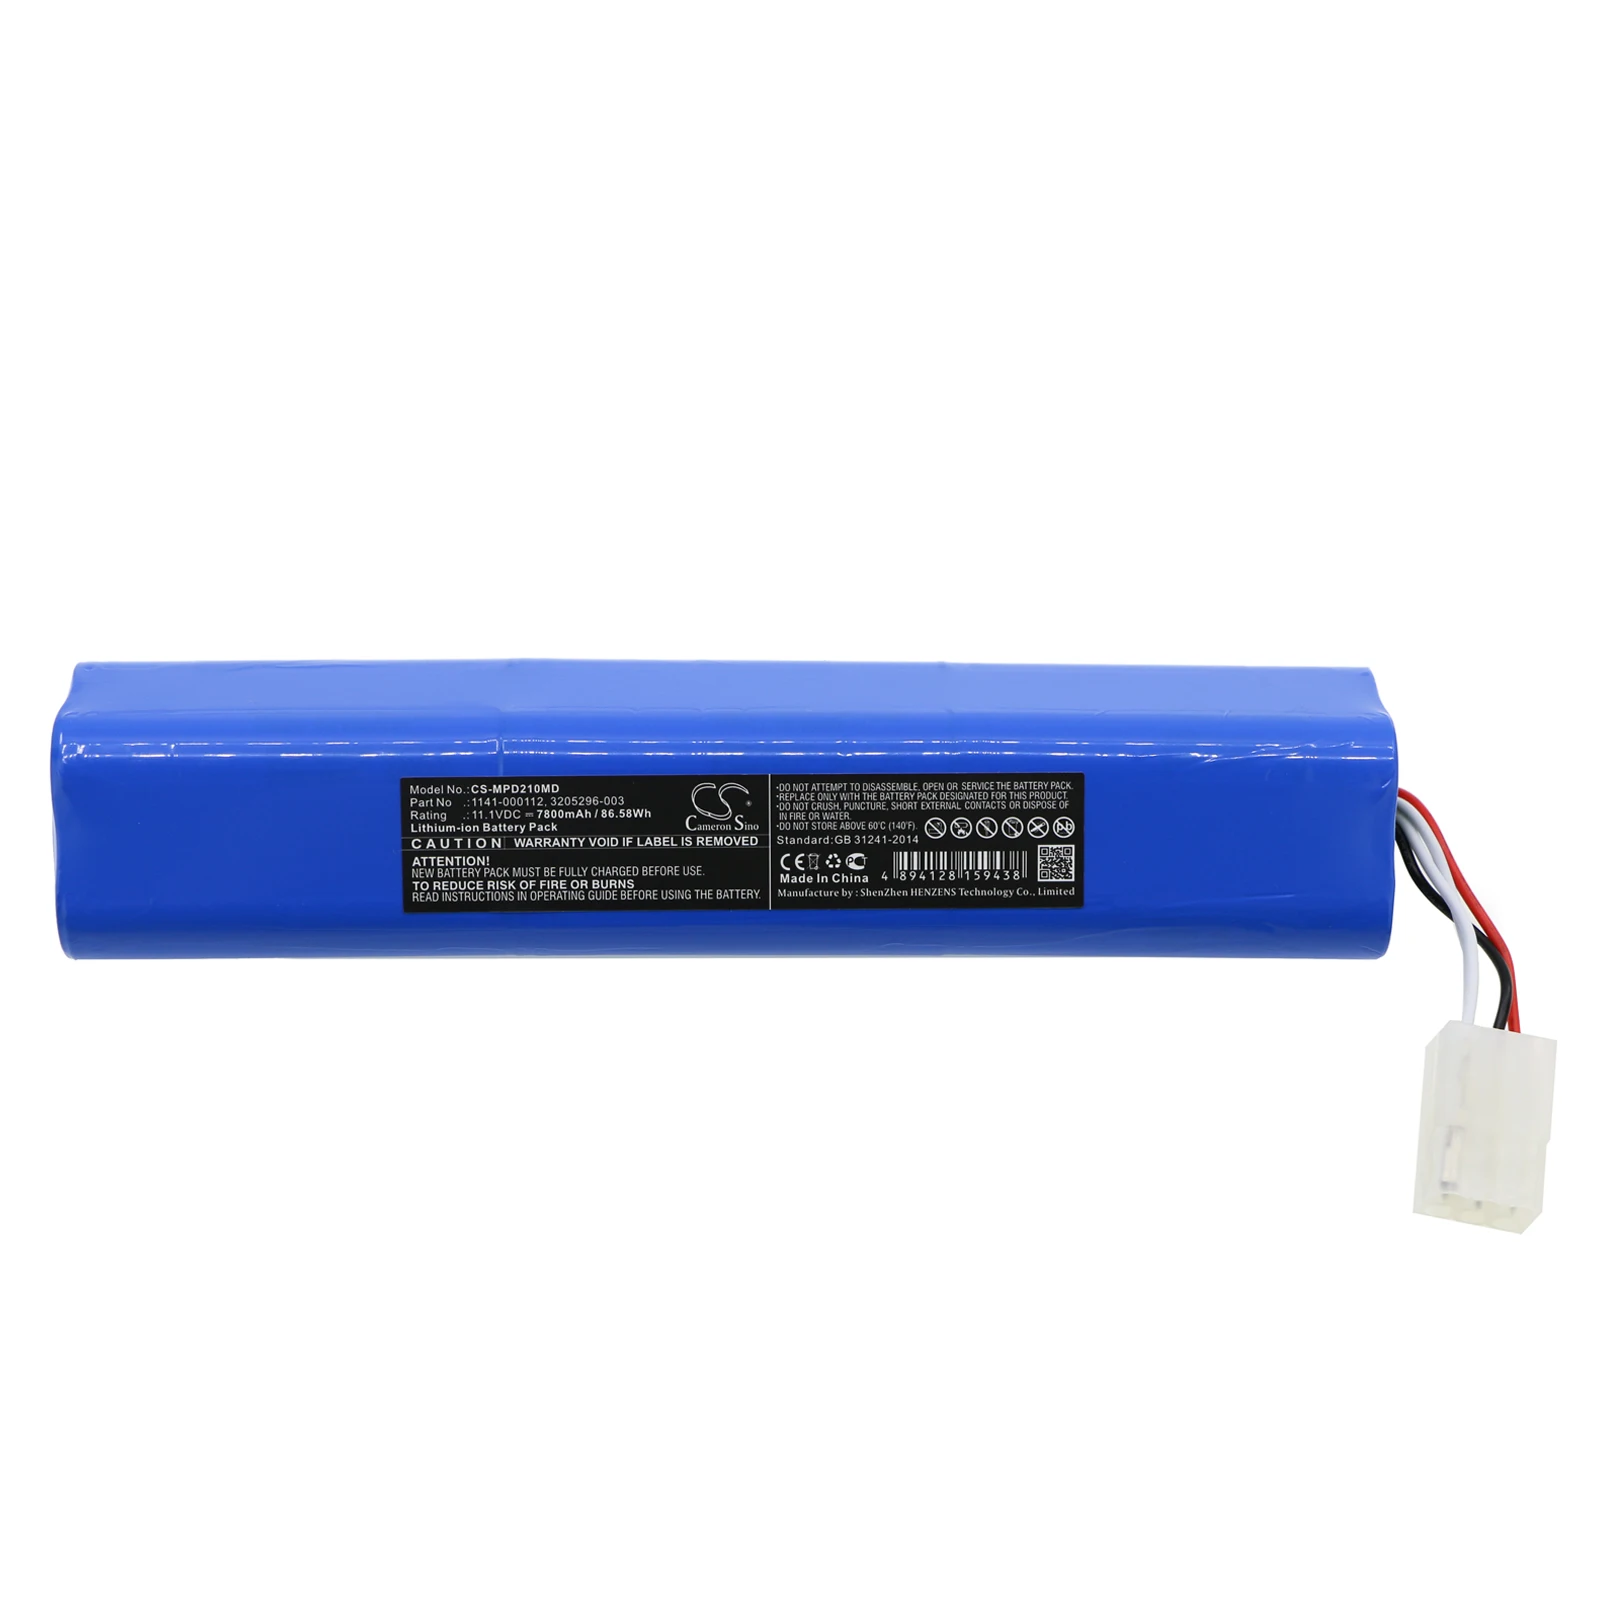 Medical Battery For Medtronic 11141-000112 3205296-003 Physio-Control 11141-000112 ，Our store has promotional activities